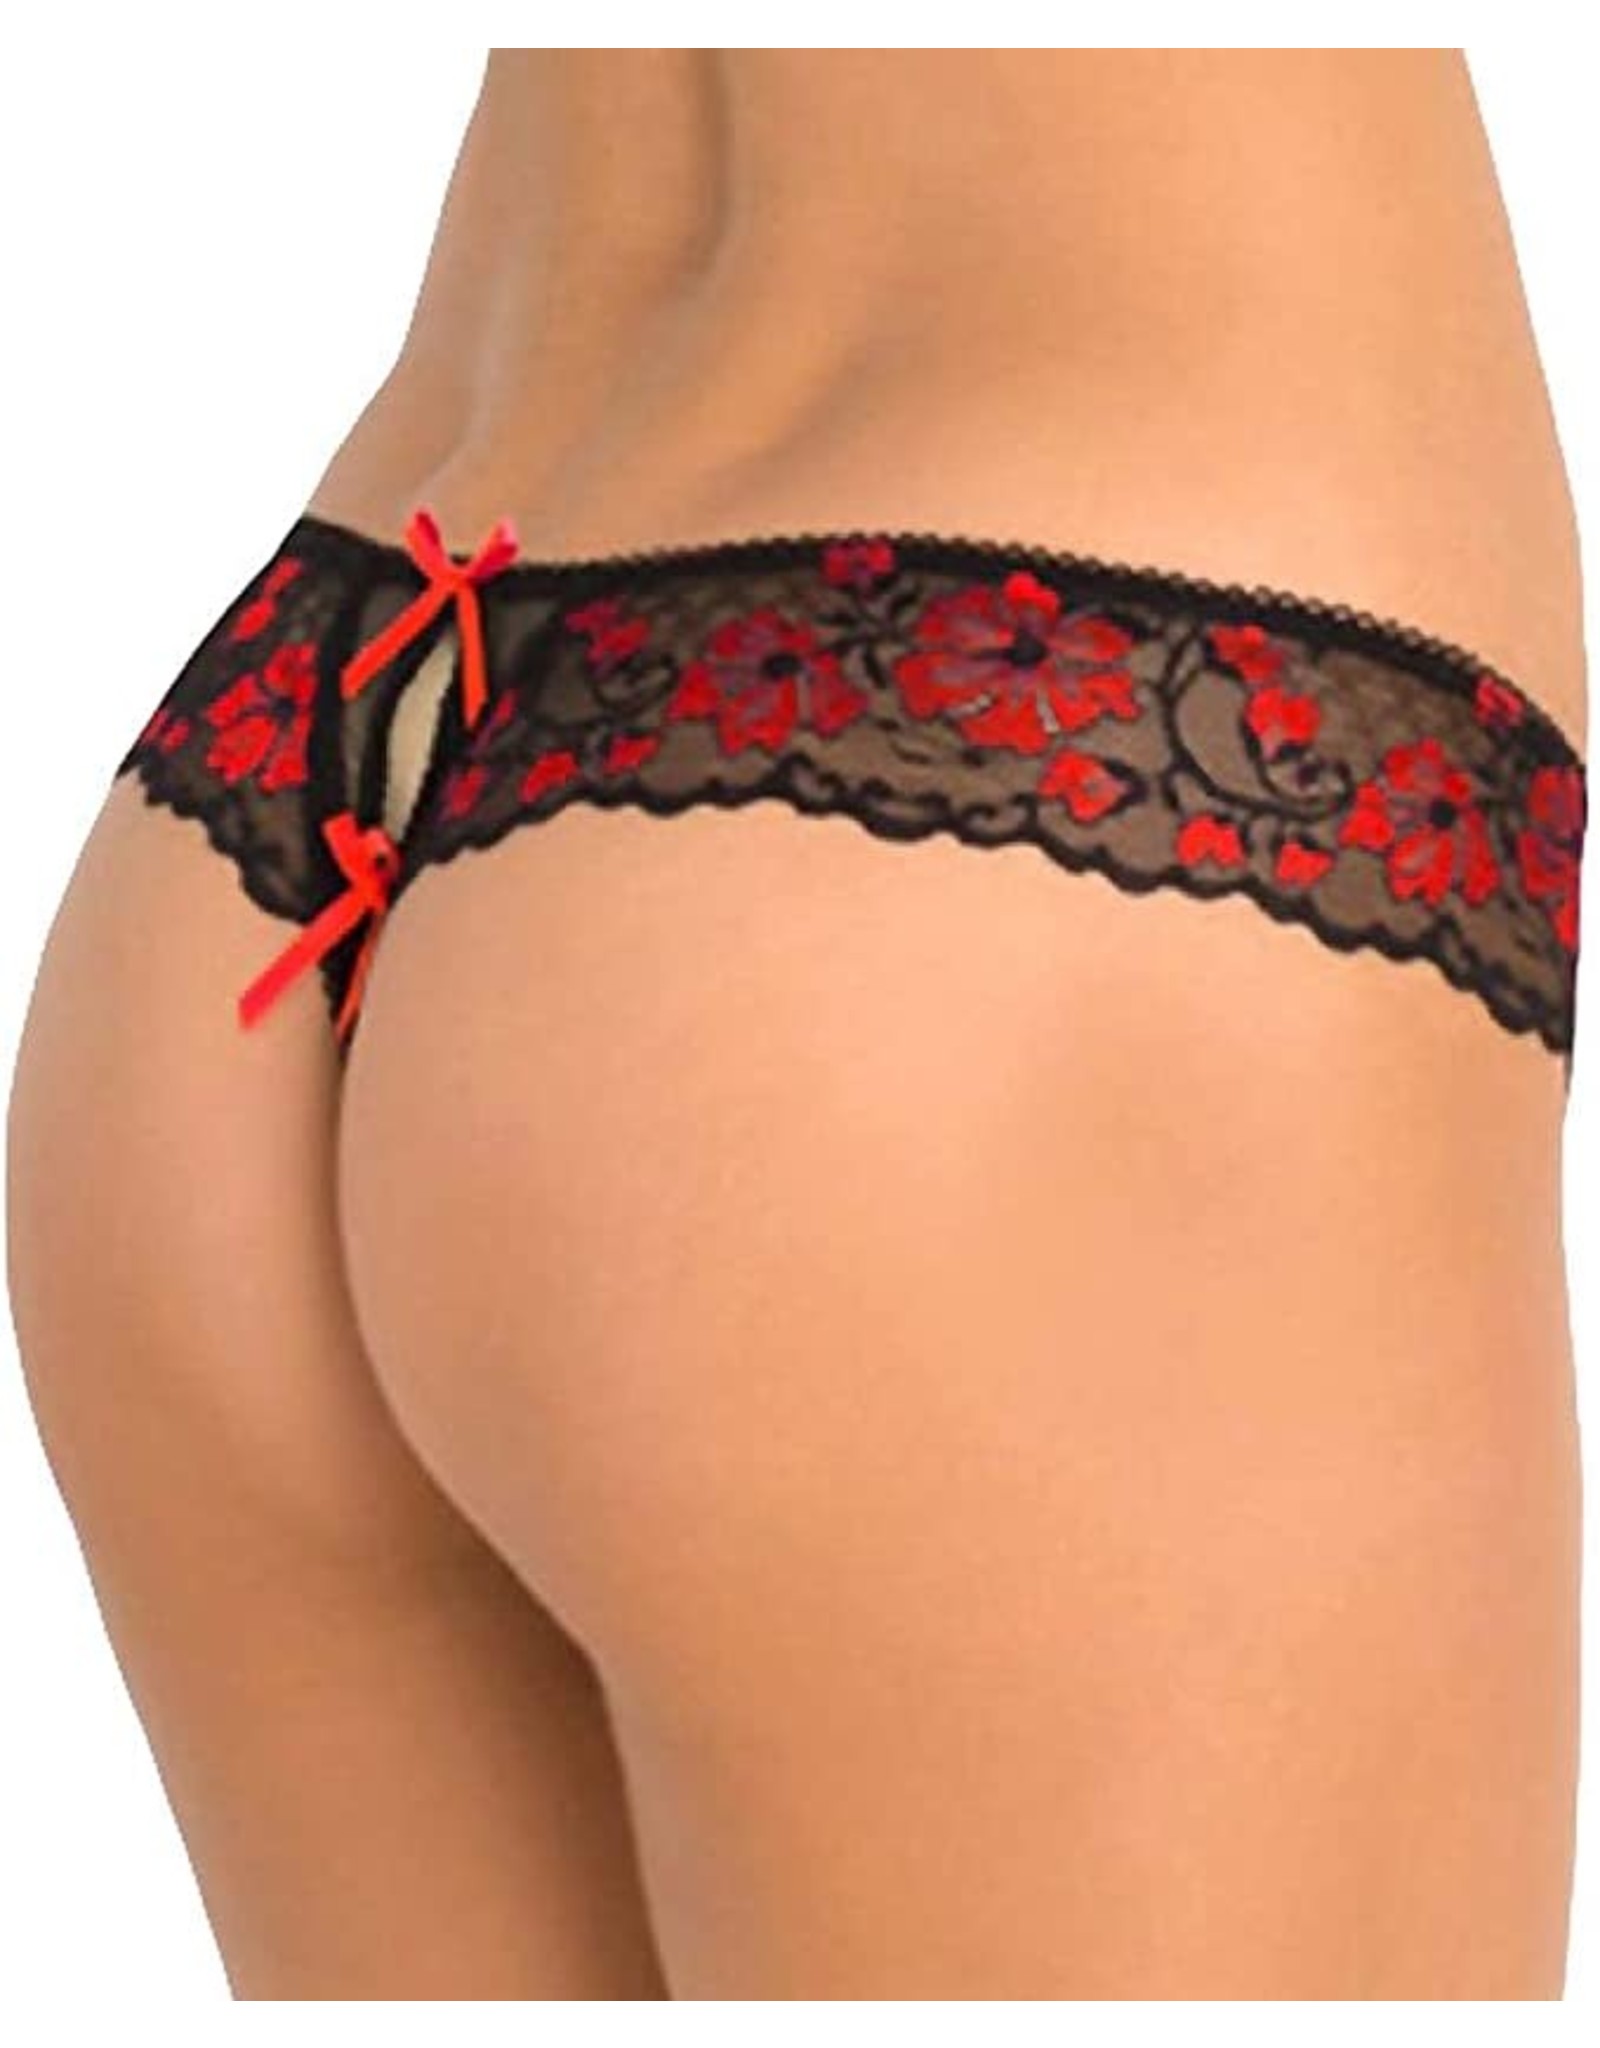 RENE ROFE LINGERIE CROTCHLESS LACE THONG WITH BOWS - S/M - BLACK AND RED